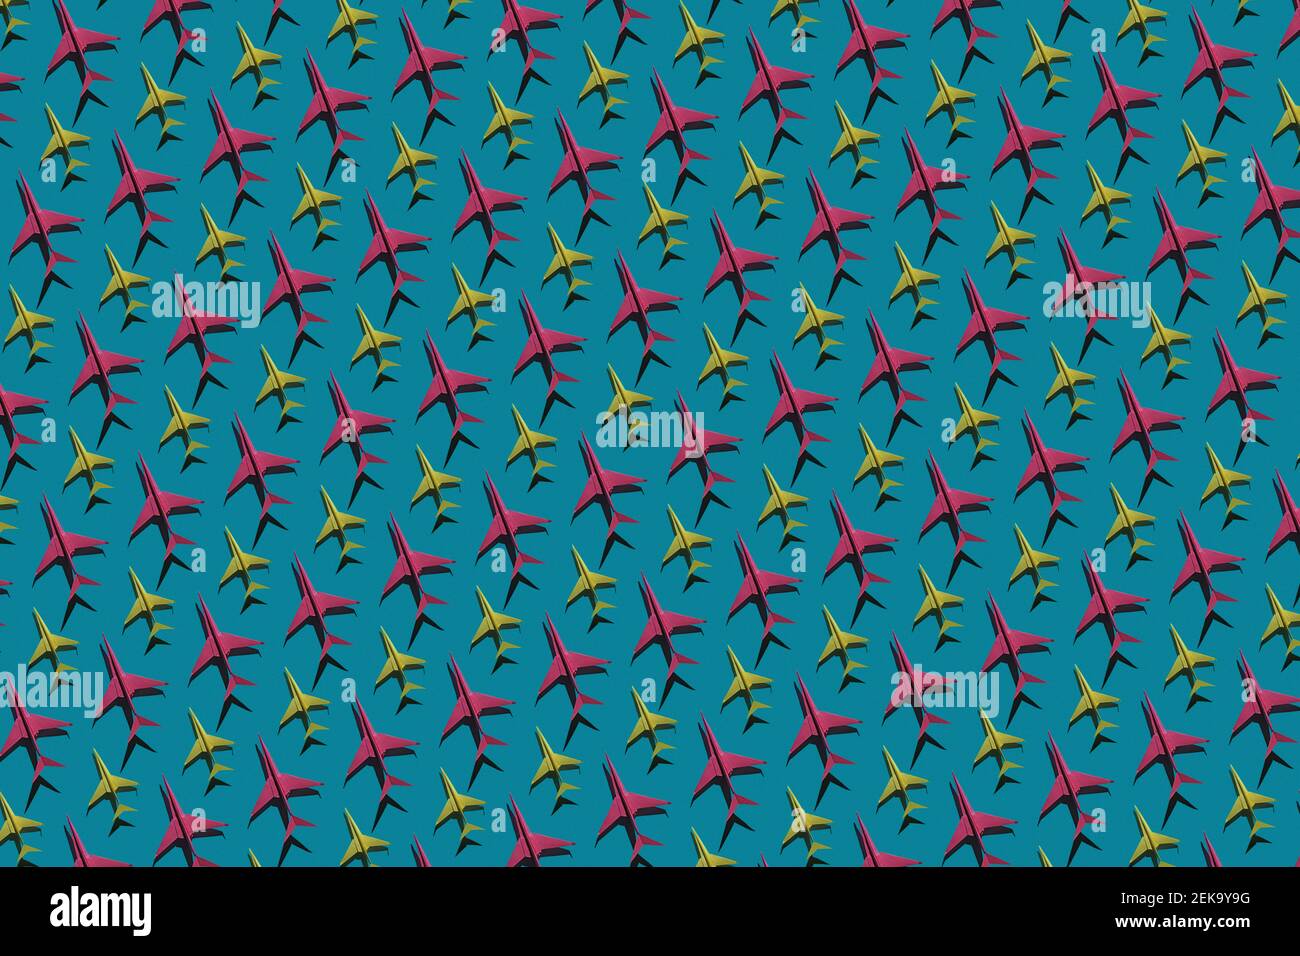 Pattern of pink and yellow origami airplanes Stock Photo